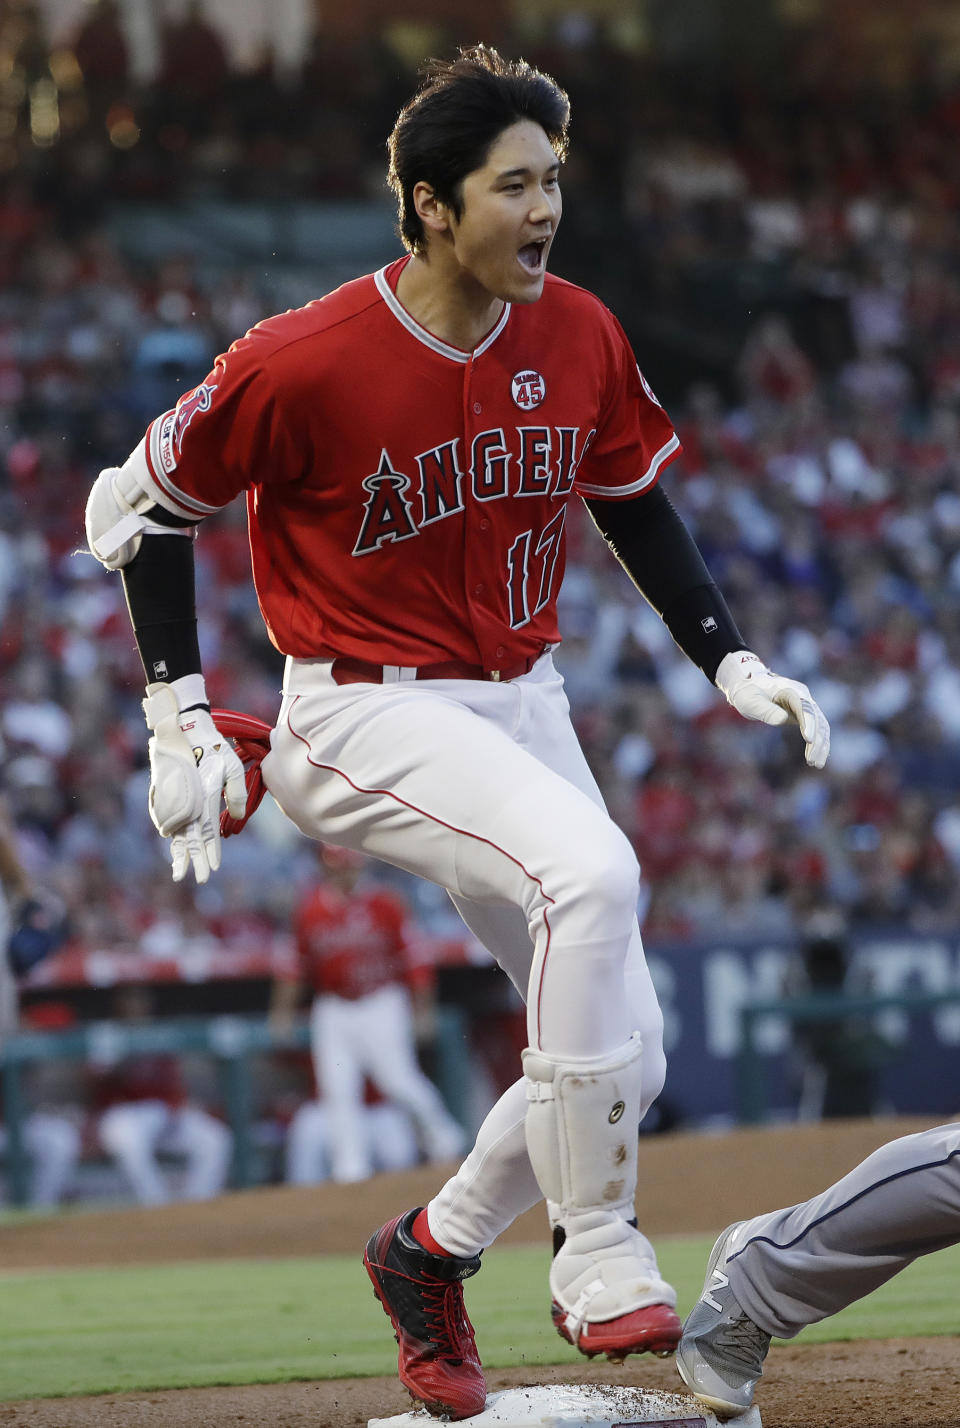 Los Angeles Angels' Shohei Ohtani reaches first base with an RBI infield single against the Houston Astros during the first inning of a baseball game Tuesday, July 16, 2019, in Anaheim, Calif. (AP Photo/Marcio Jose Sanchez)